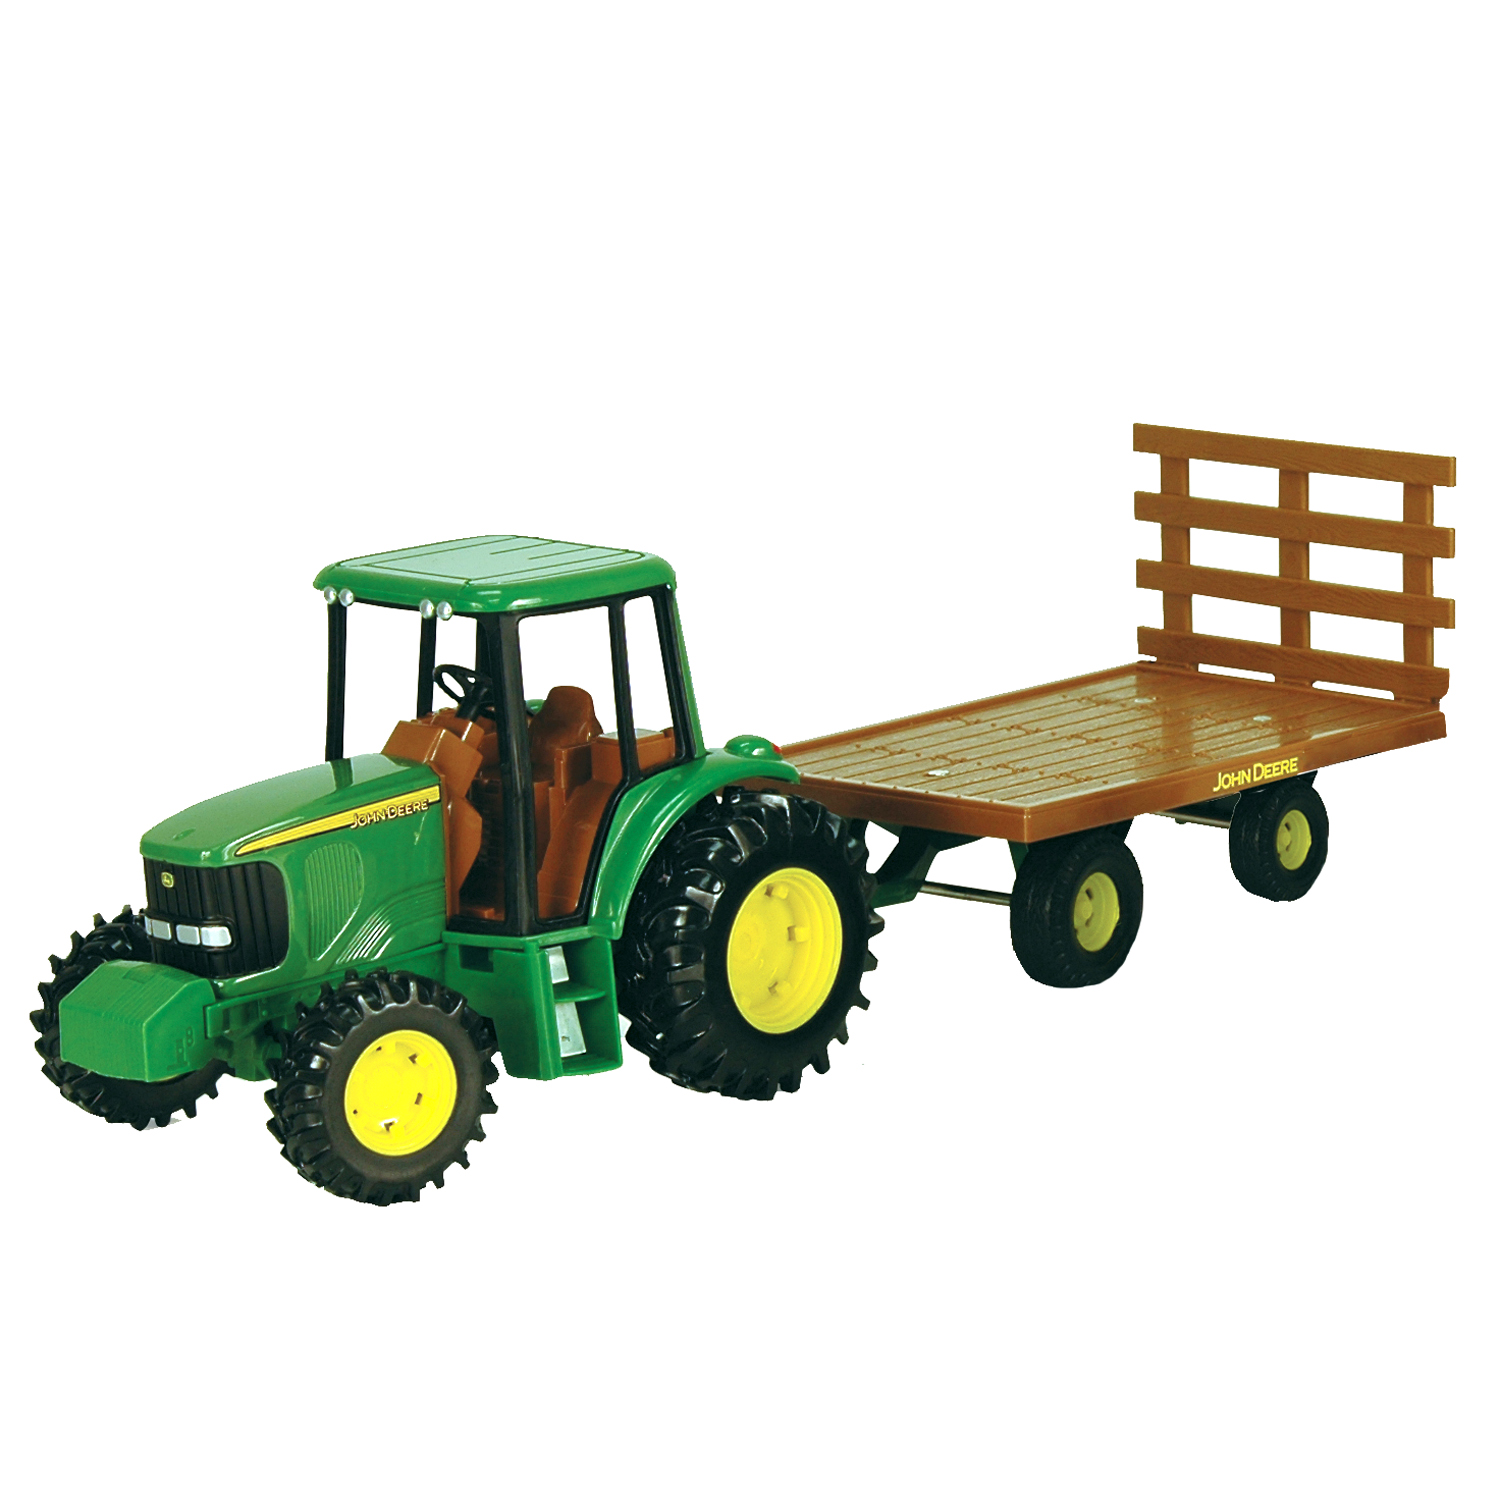 John Deere Toys - 8 Tractor with Flatbed at ToyStop